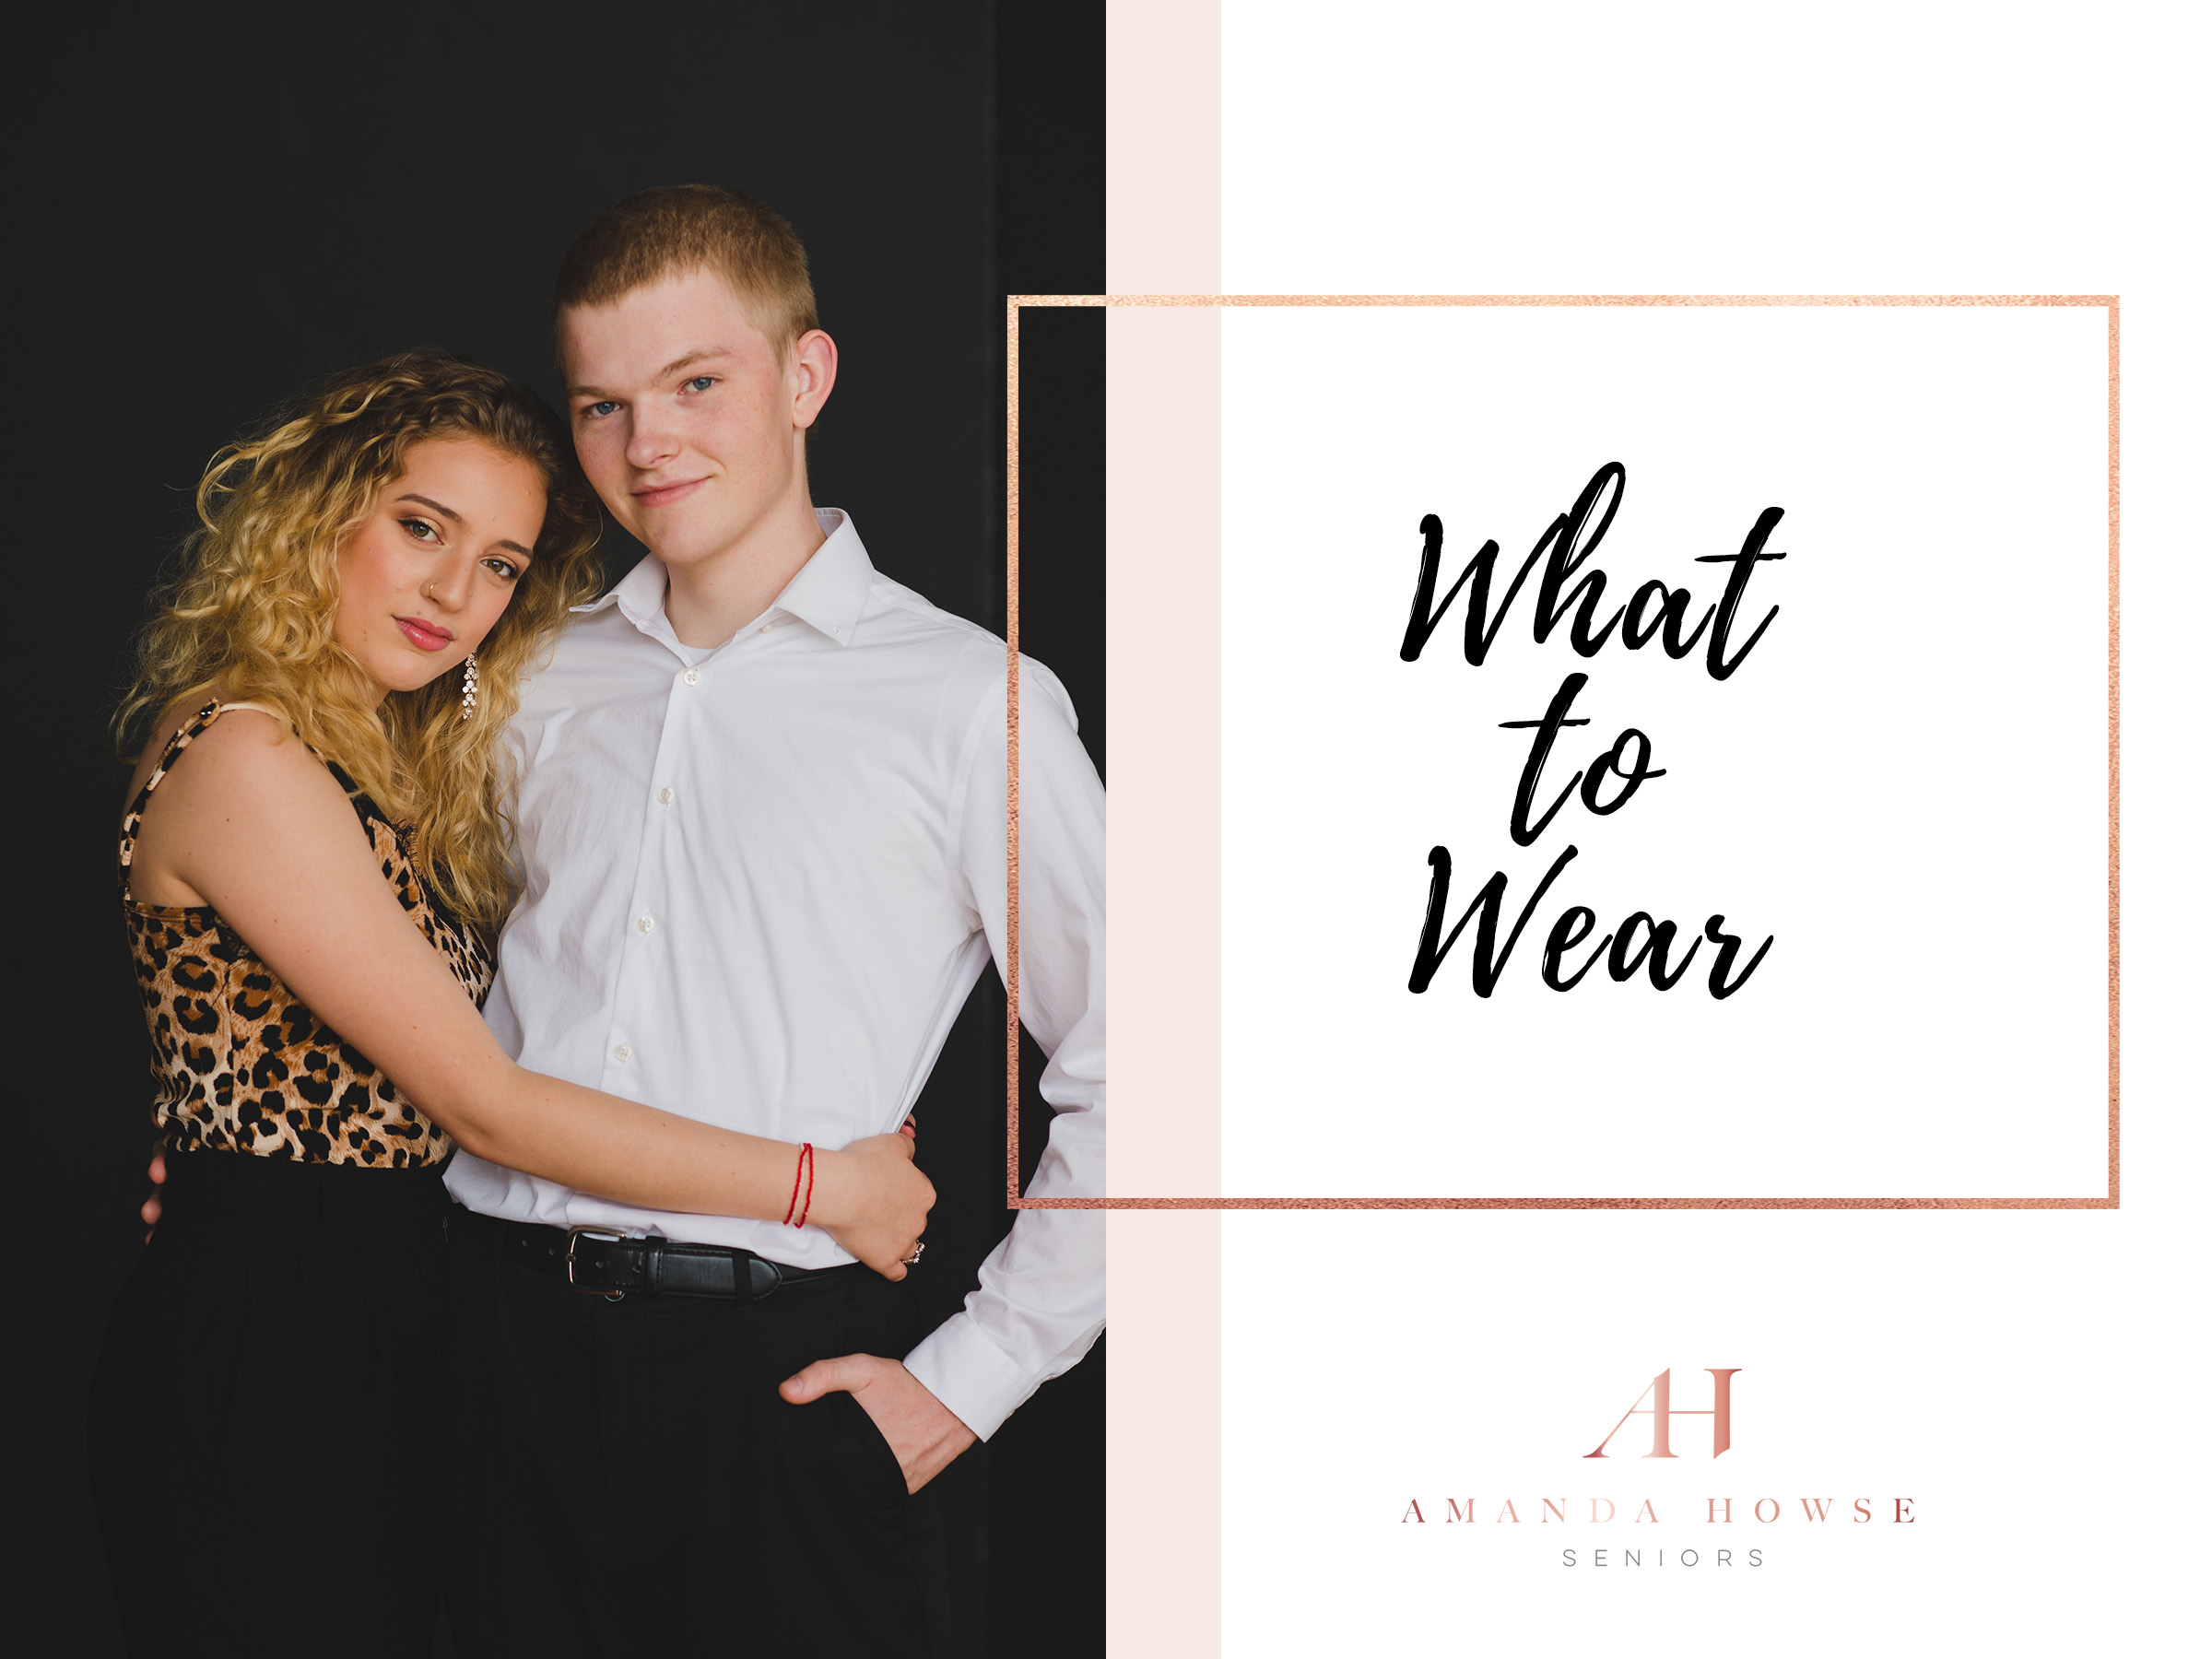 What to Wear for Senior Portraits | The Best Outfit Ideas and Tips on How to Accessorize from Tacoma Senior Photographer Amanda Howse